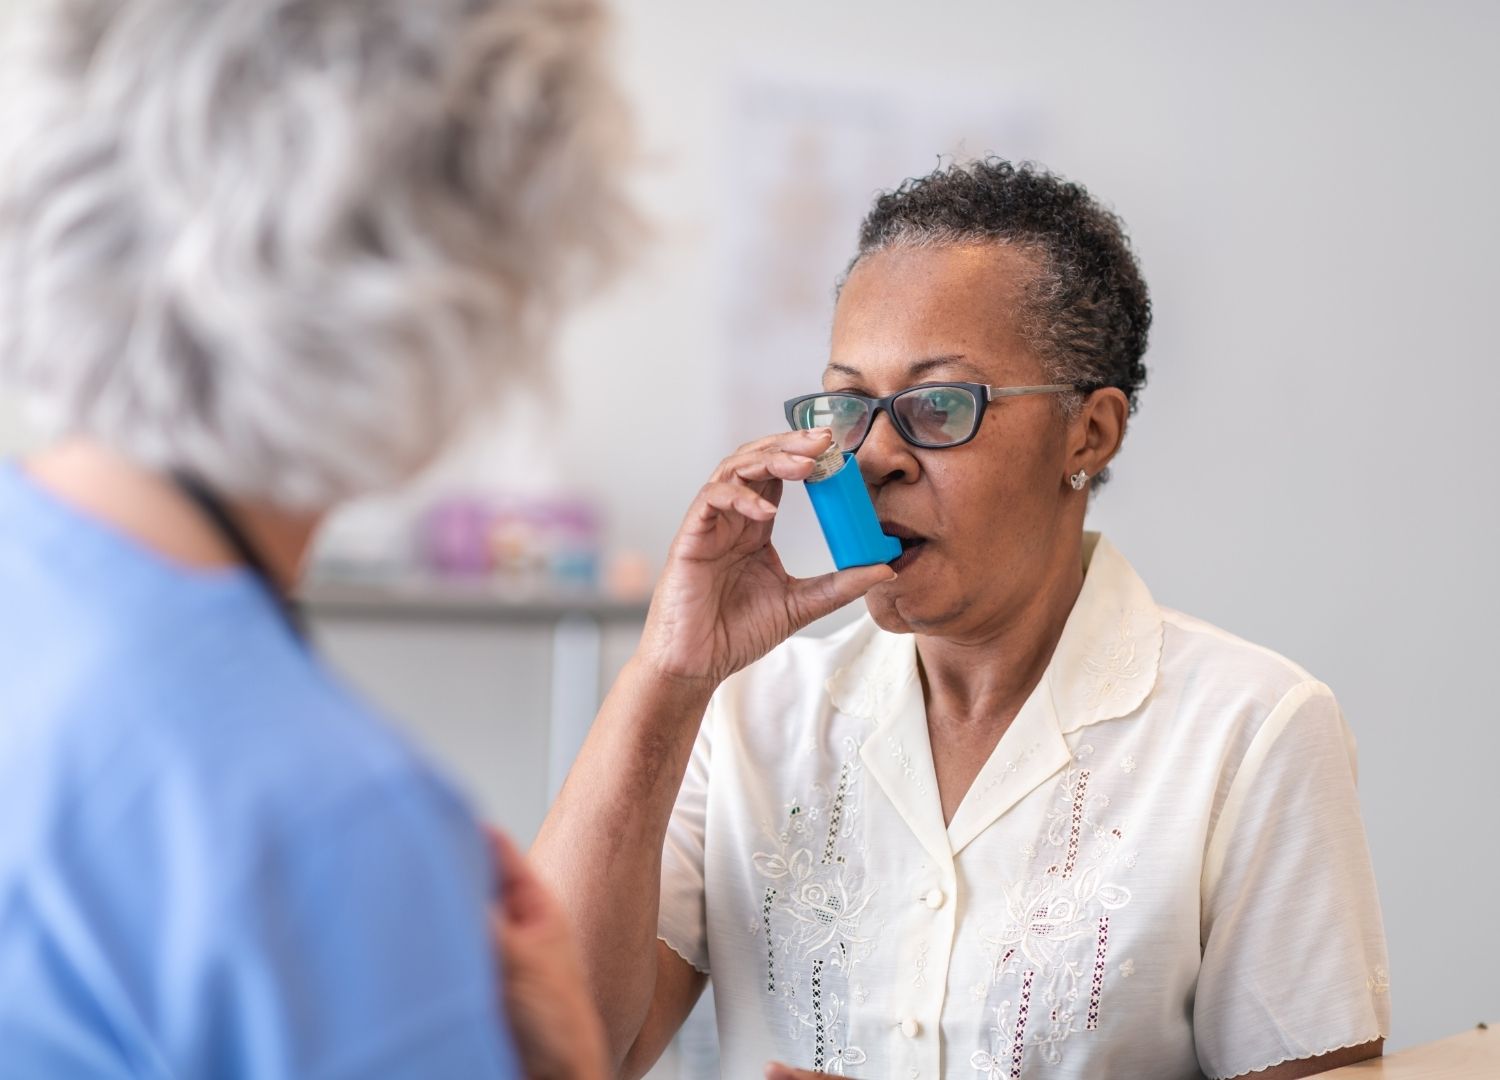 Asthma: Signs Your Asthma Is Becoming Dangerous